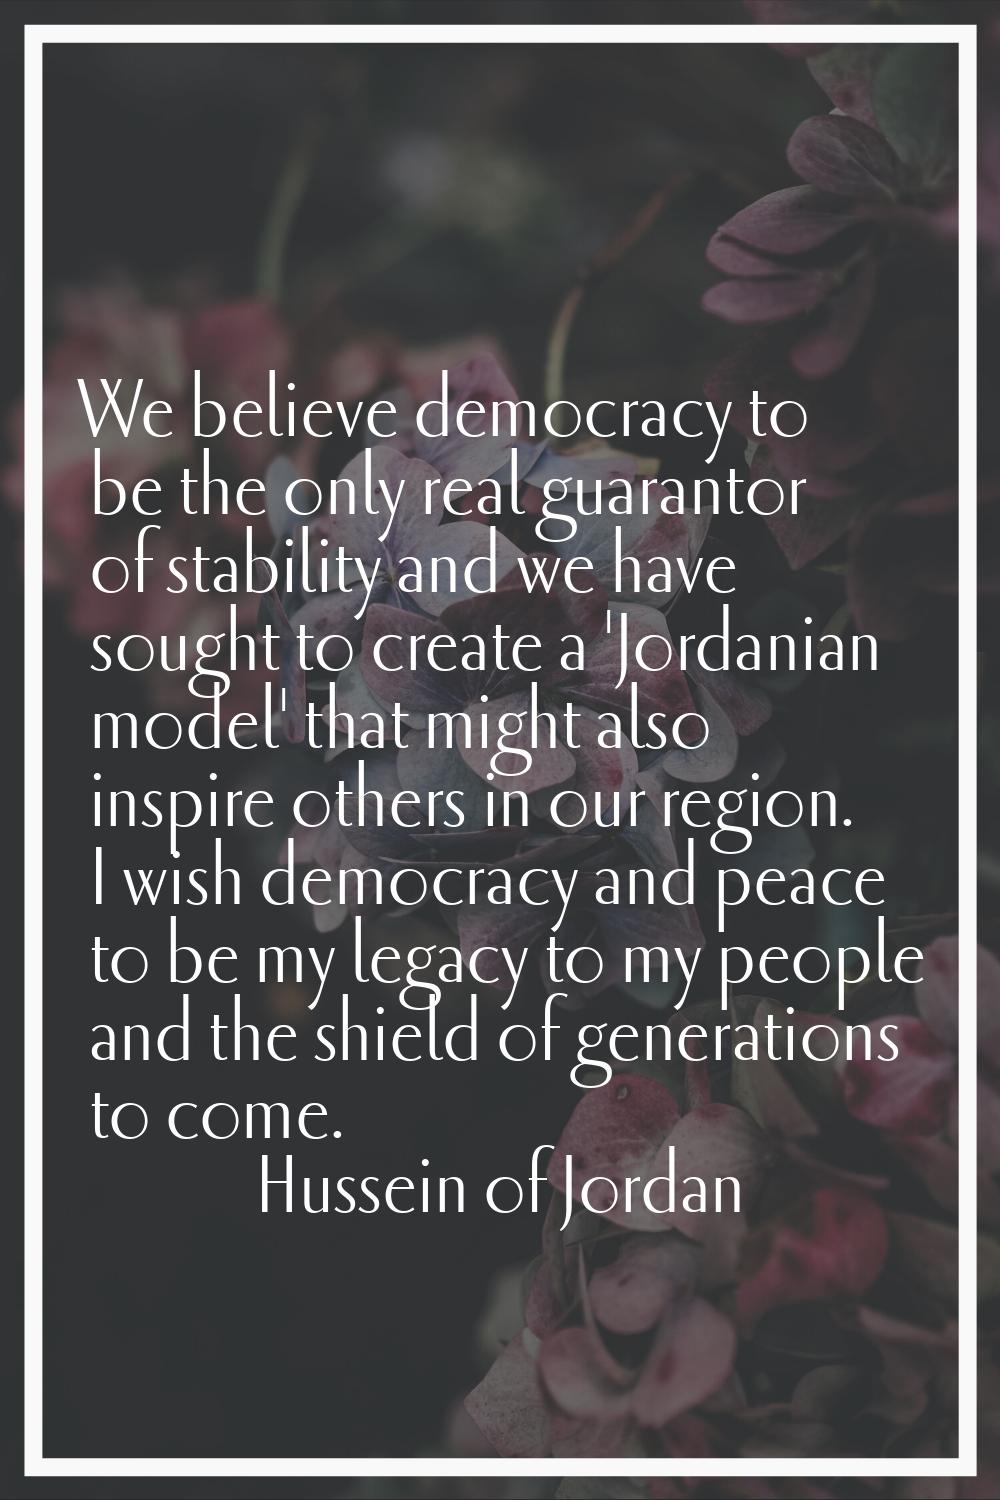 We believe democracy to be the only real guarantor of stability and we have sought to create a 'Jor